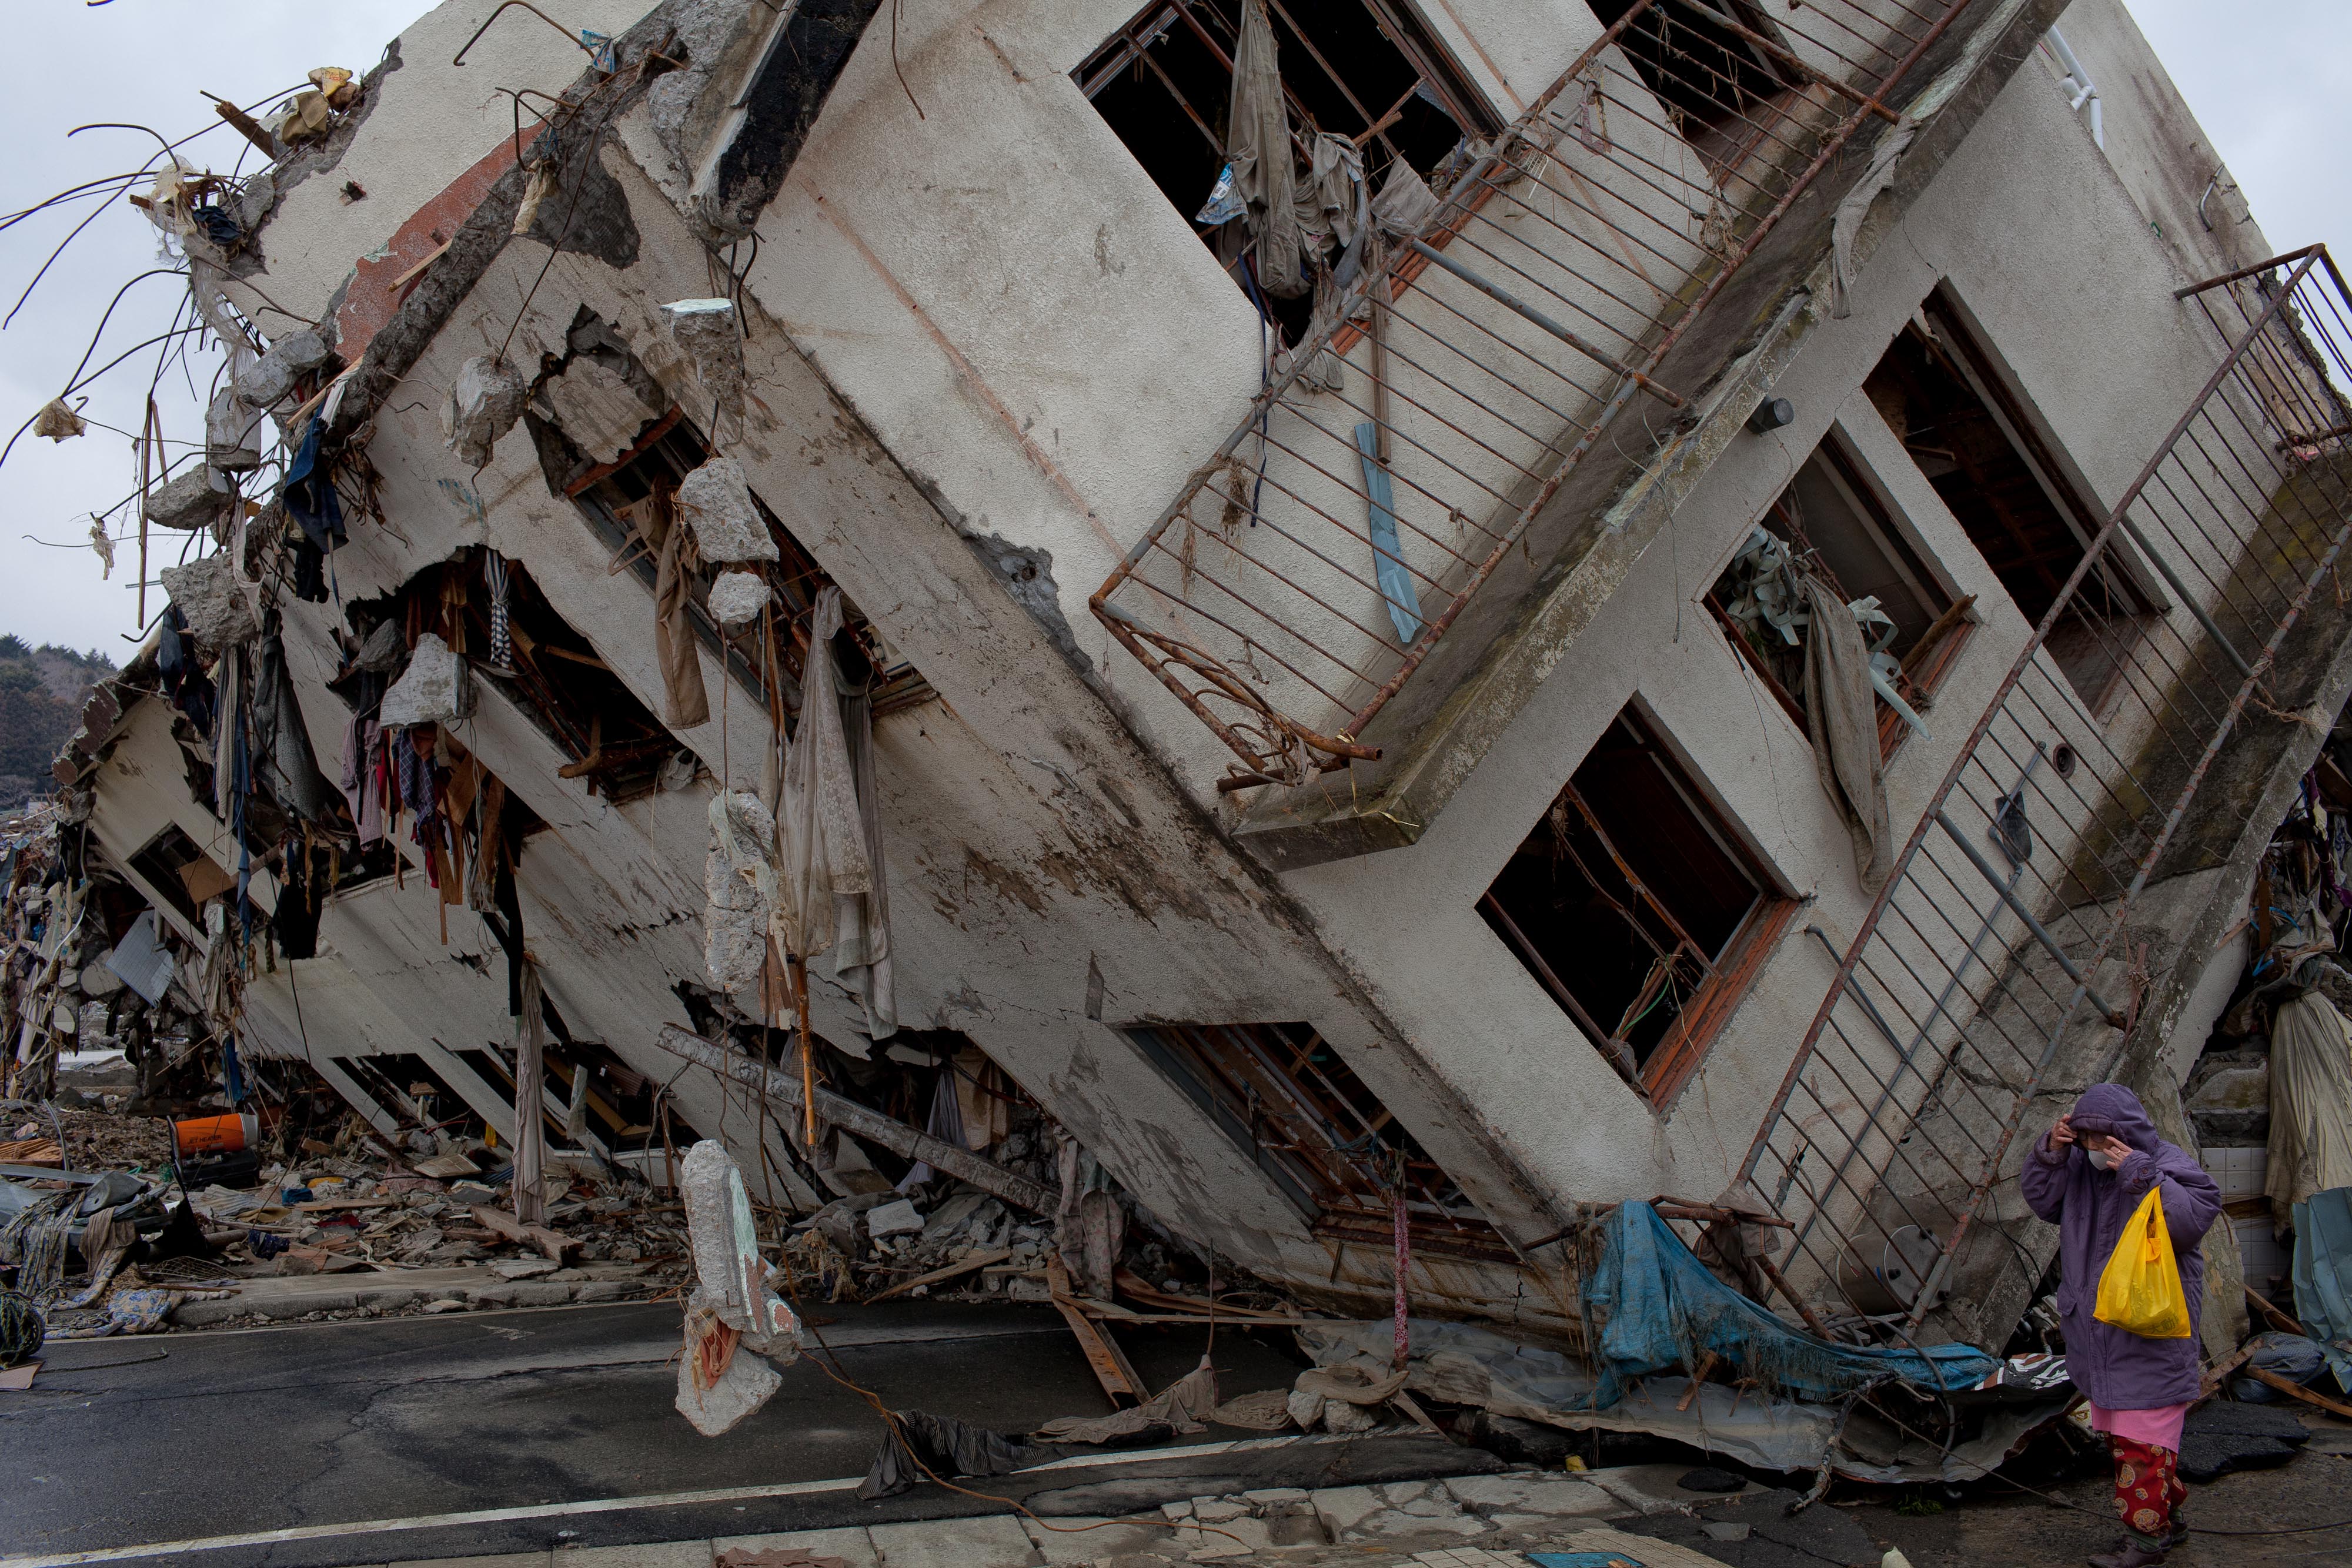 A destroyed building, moved by the tsunami in Japan’s Miyagi prefecture in 2011